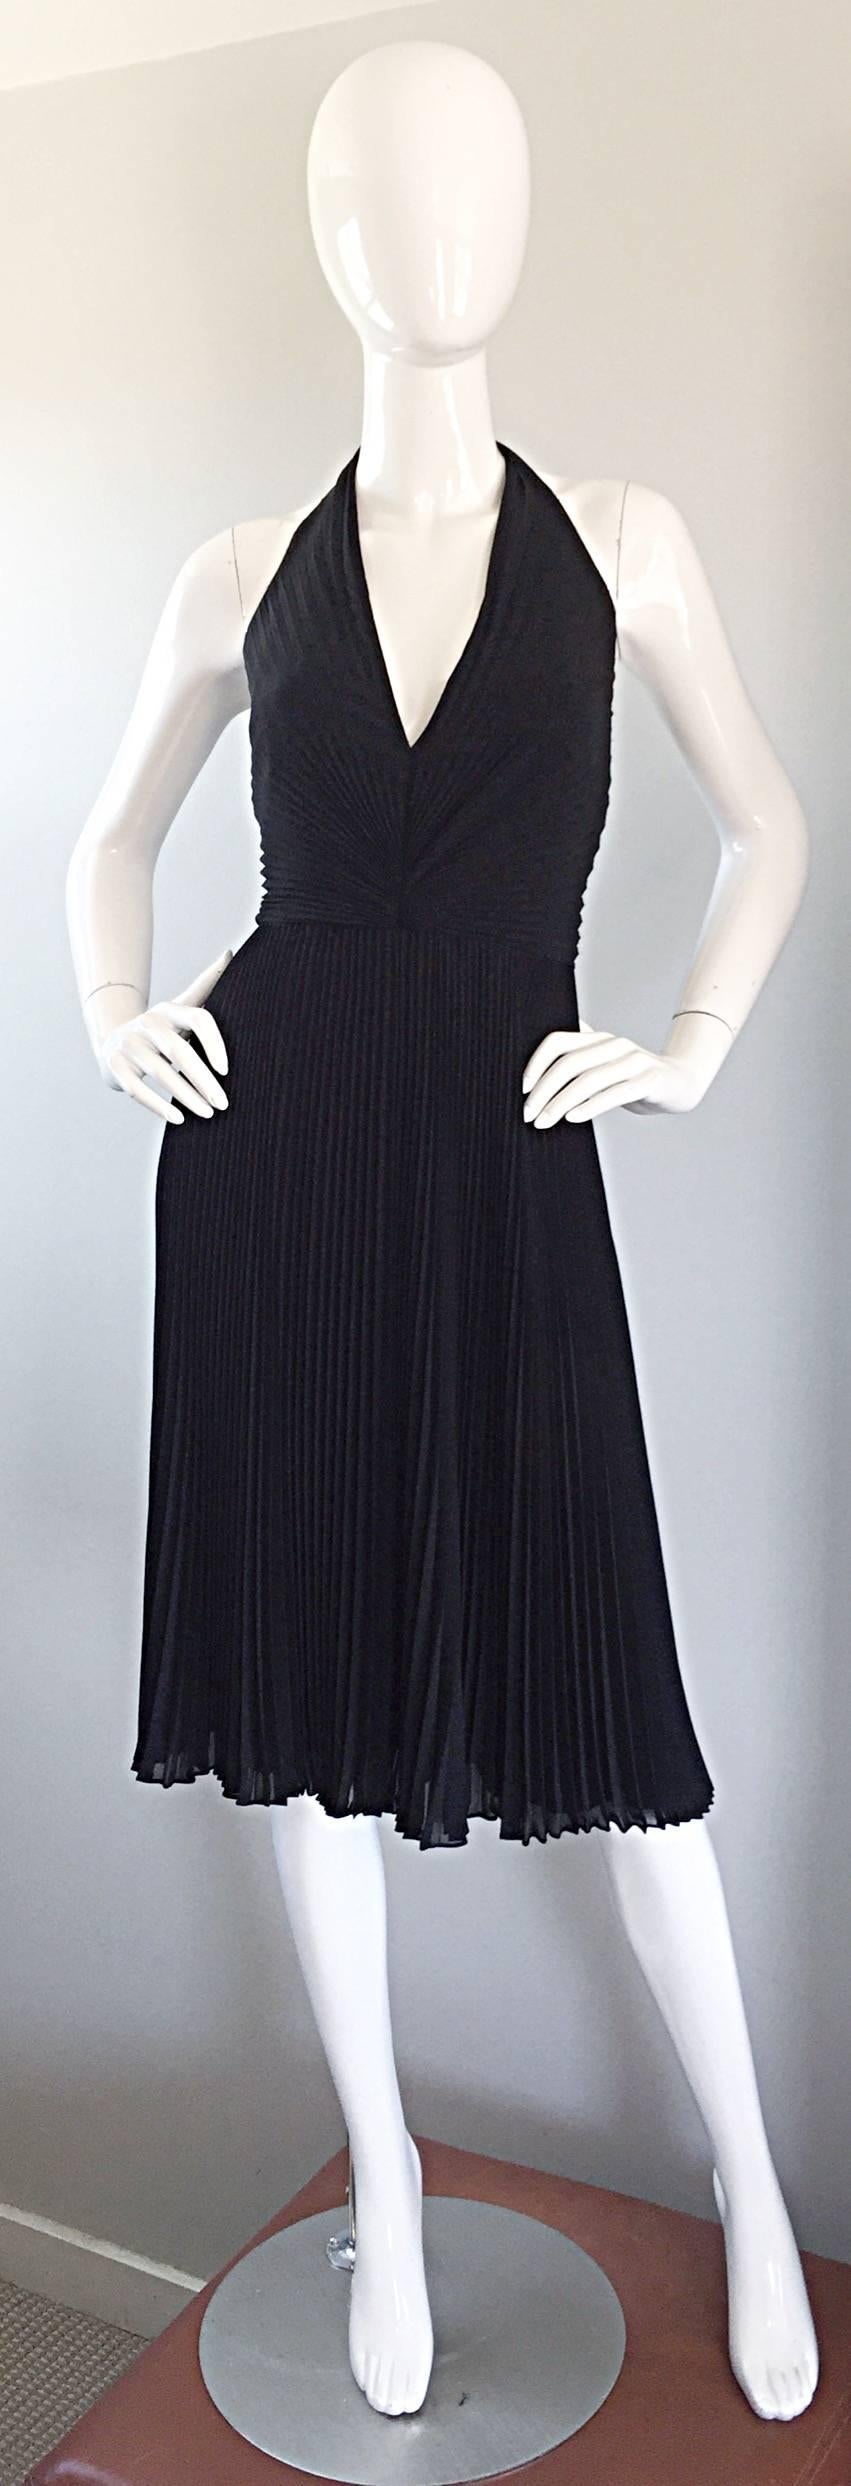 Beautiful 90s CARMEN MARC VALVO black silk knife pleated halter dress! Reminiscent of the white halter dress Marilyn Monroe made famous. Super flattering on the body, and looks fantastic with movement (perfect on the dance floor)! Hidden zipper up